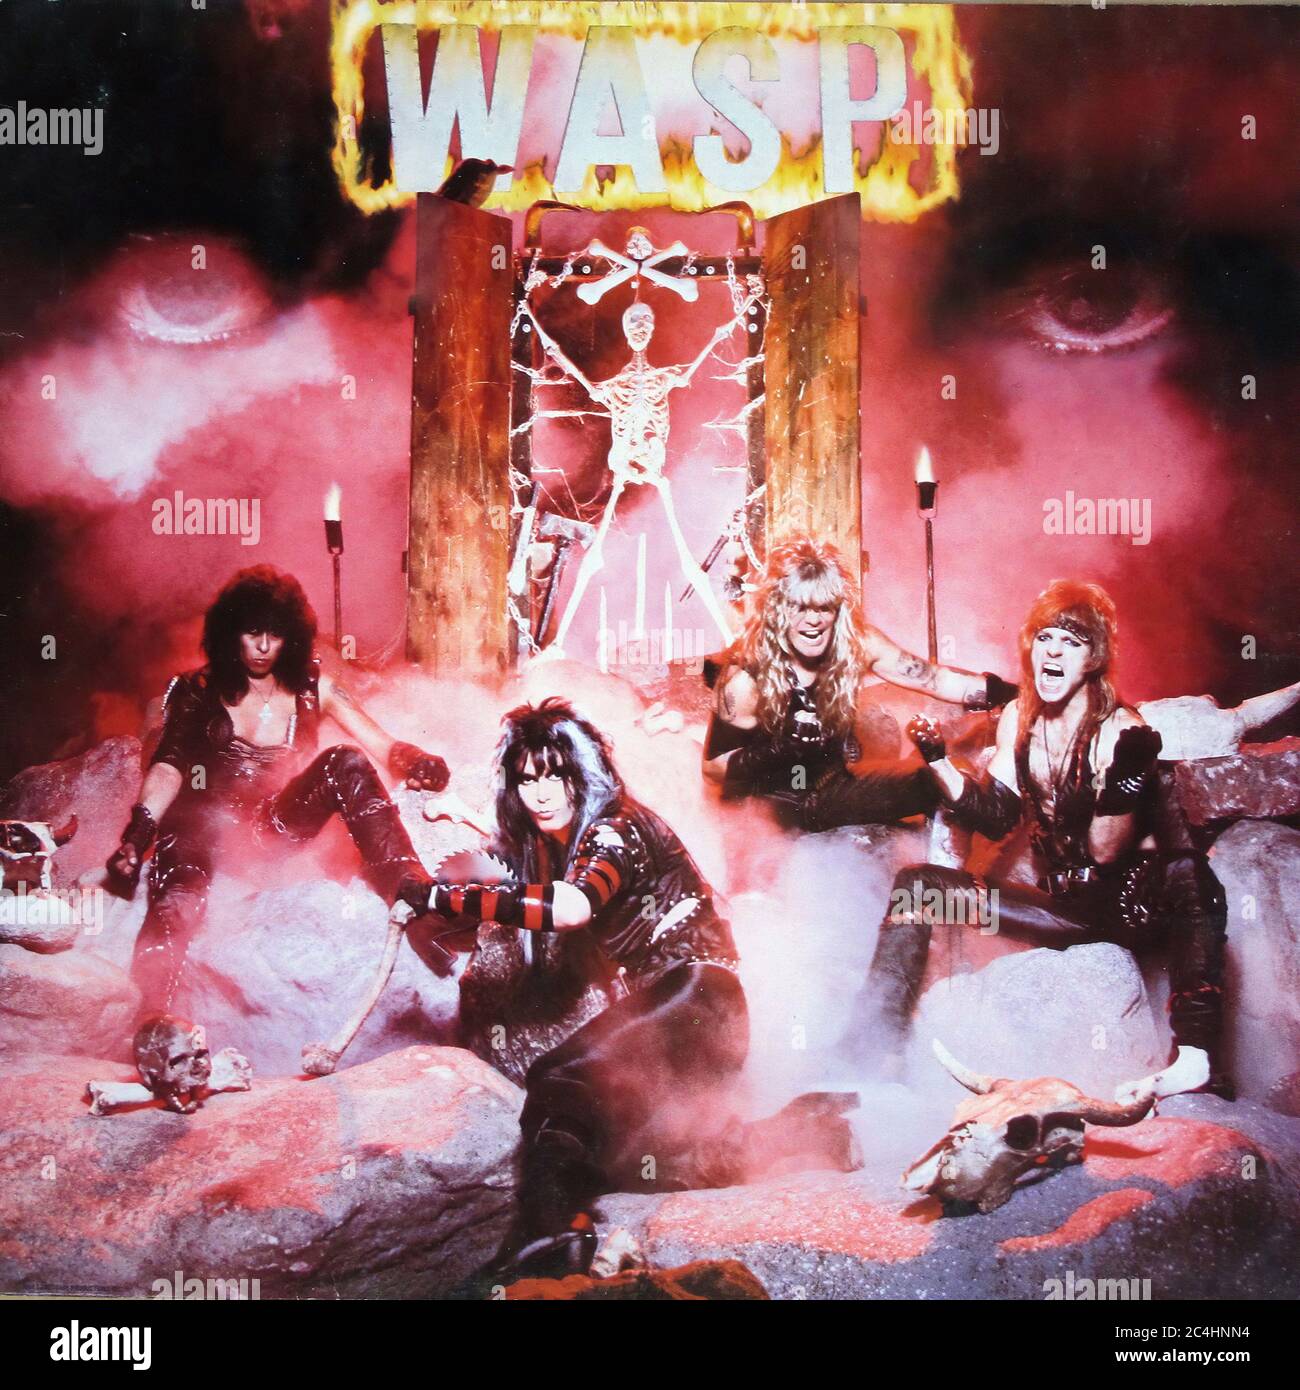 W.a.S.P. Wasp Winged Assassins 12'' Vinyl Lp - Vintage Record Cover 02 Stock Photo